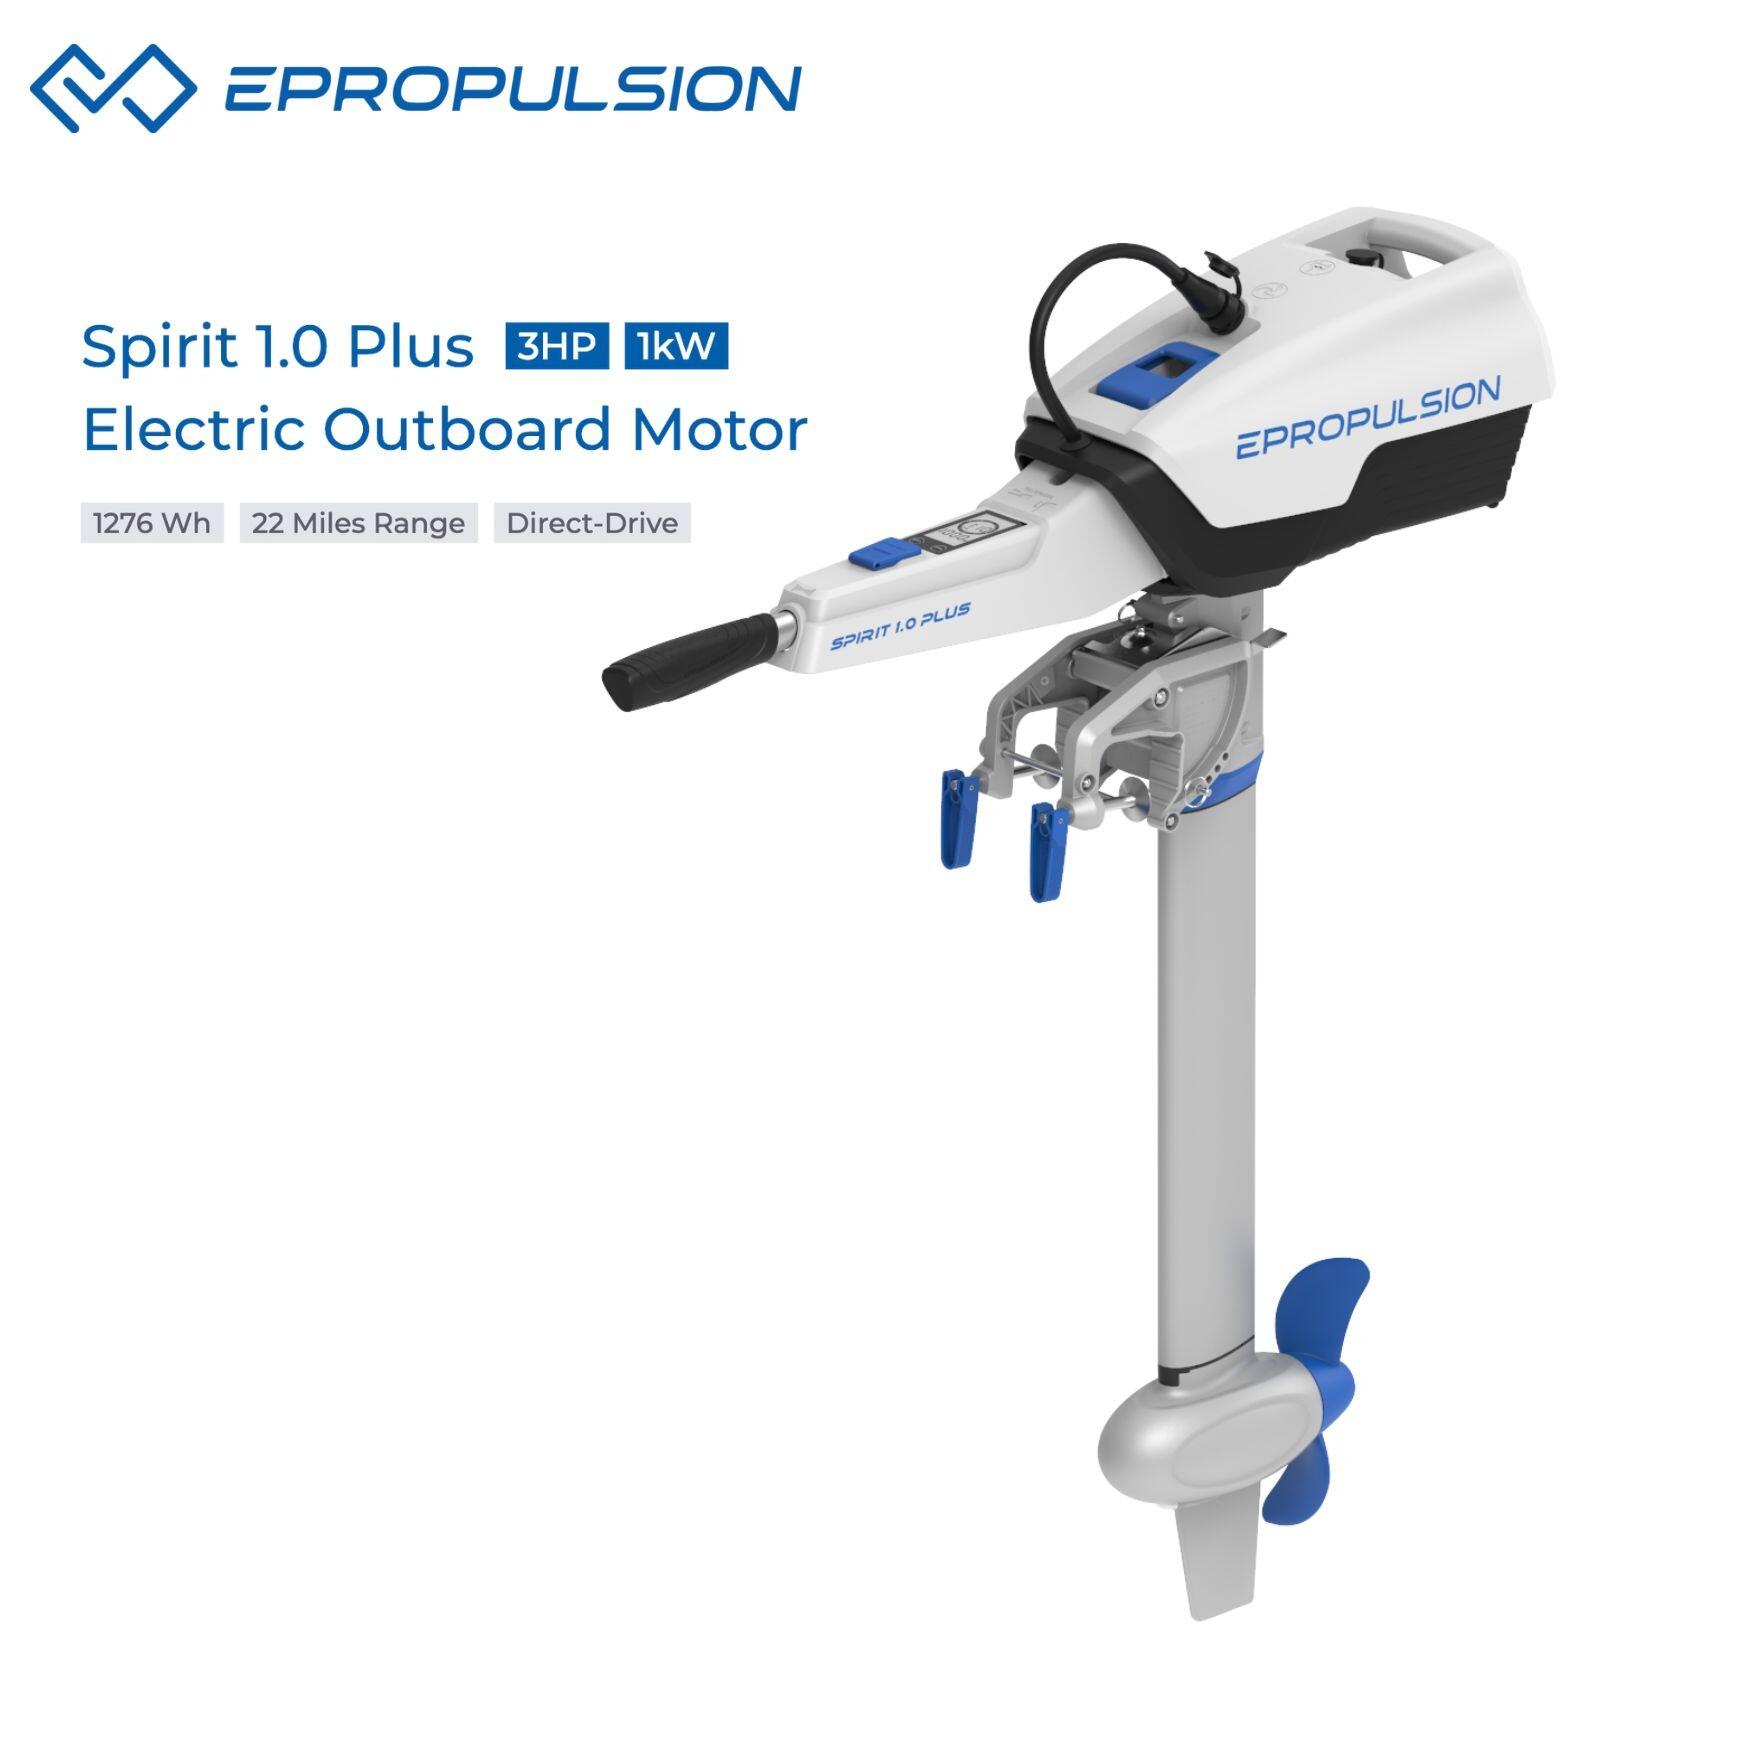 ePropulsion Spirit 1.0 Plus electric outboard pic 1